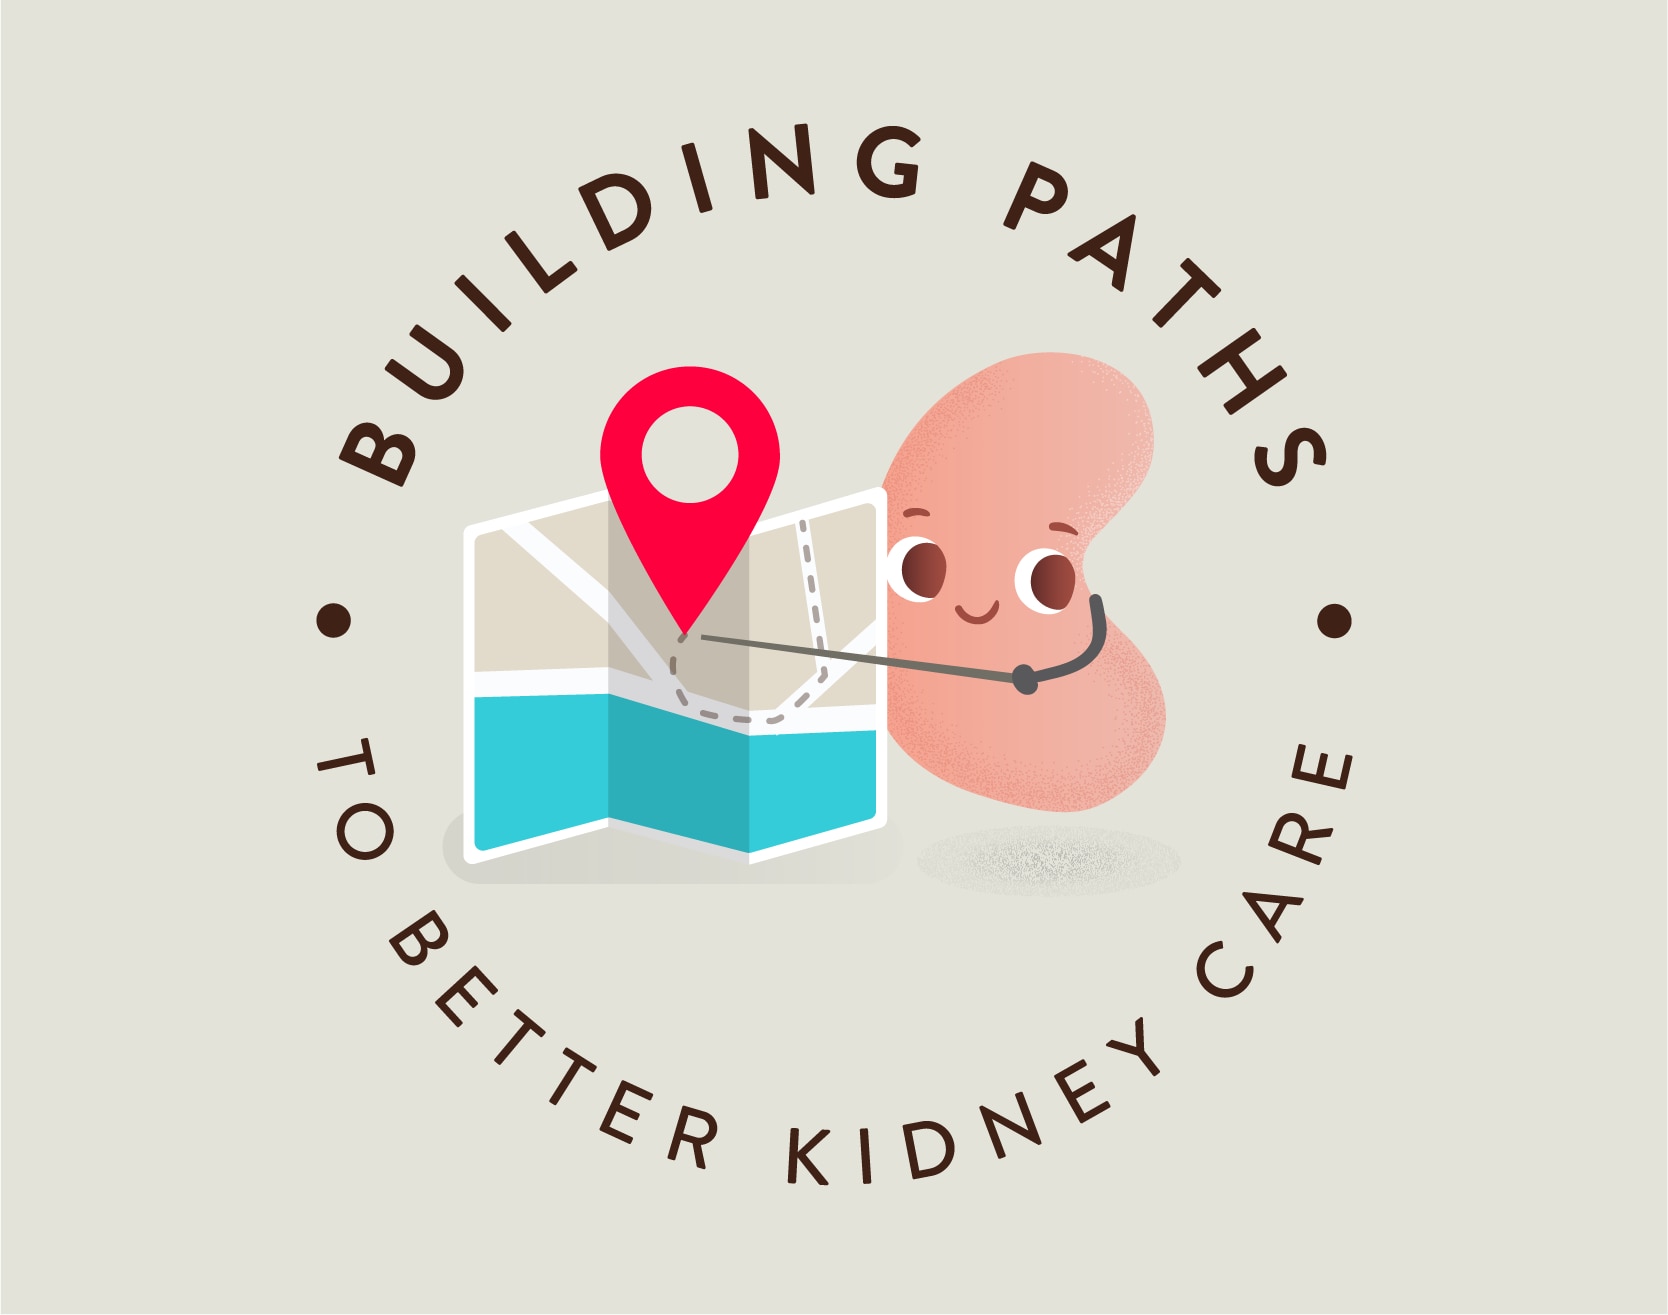 Cartoon drawing of a kidney with a map reading “building paths to better kidney care.”